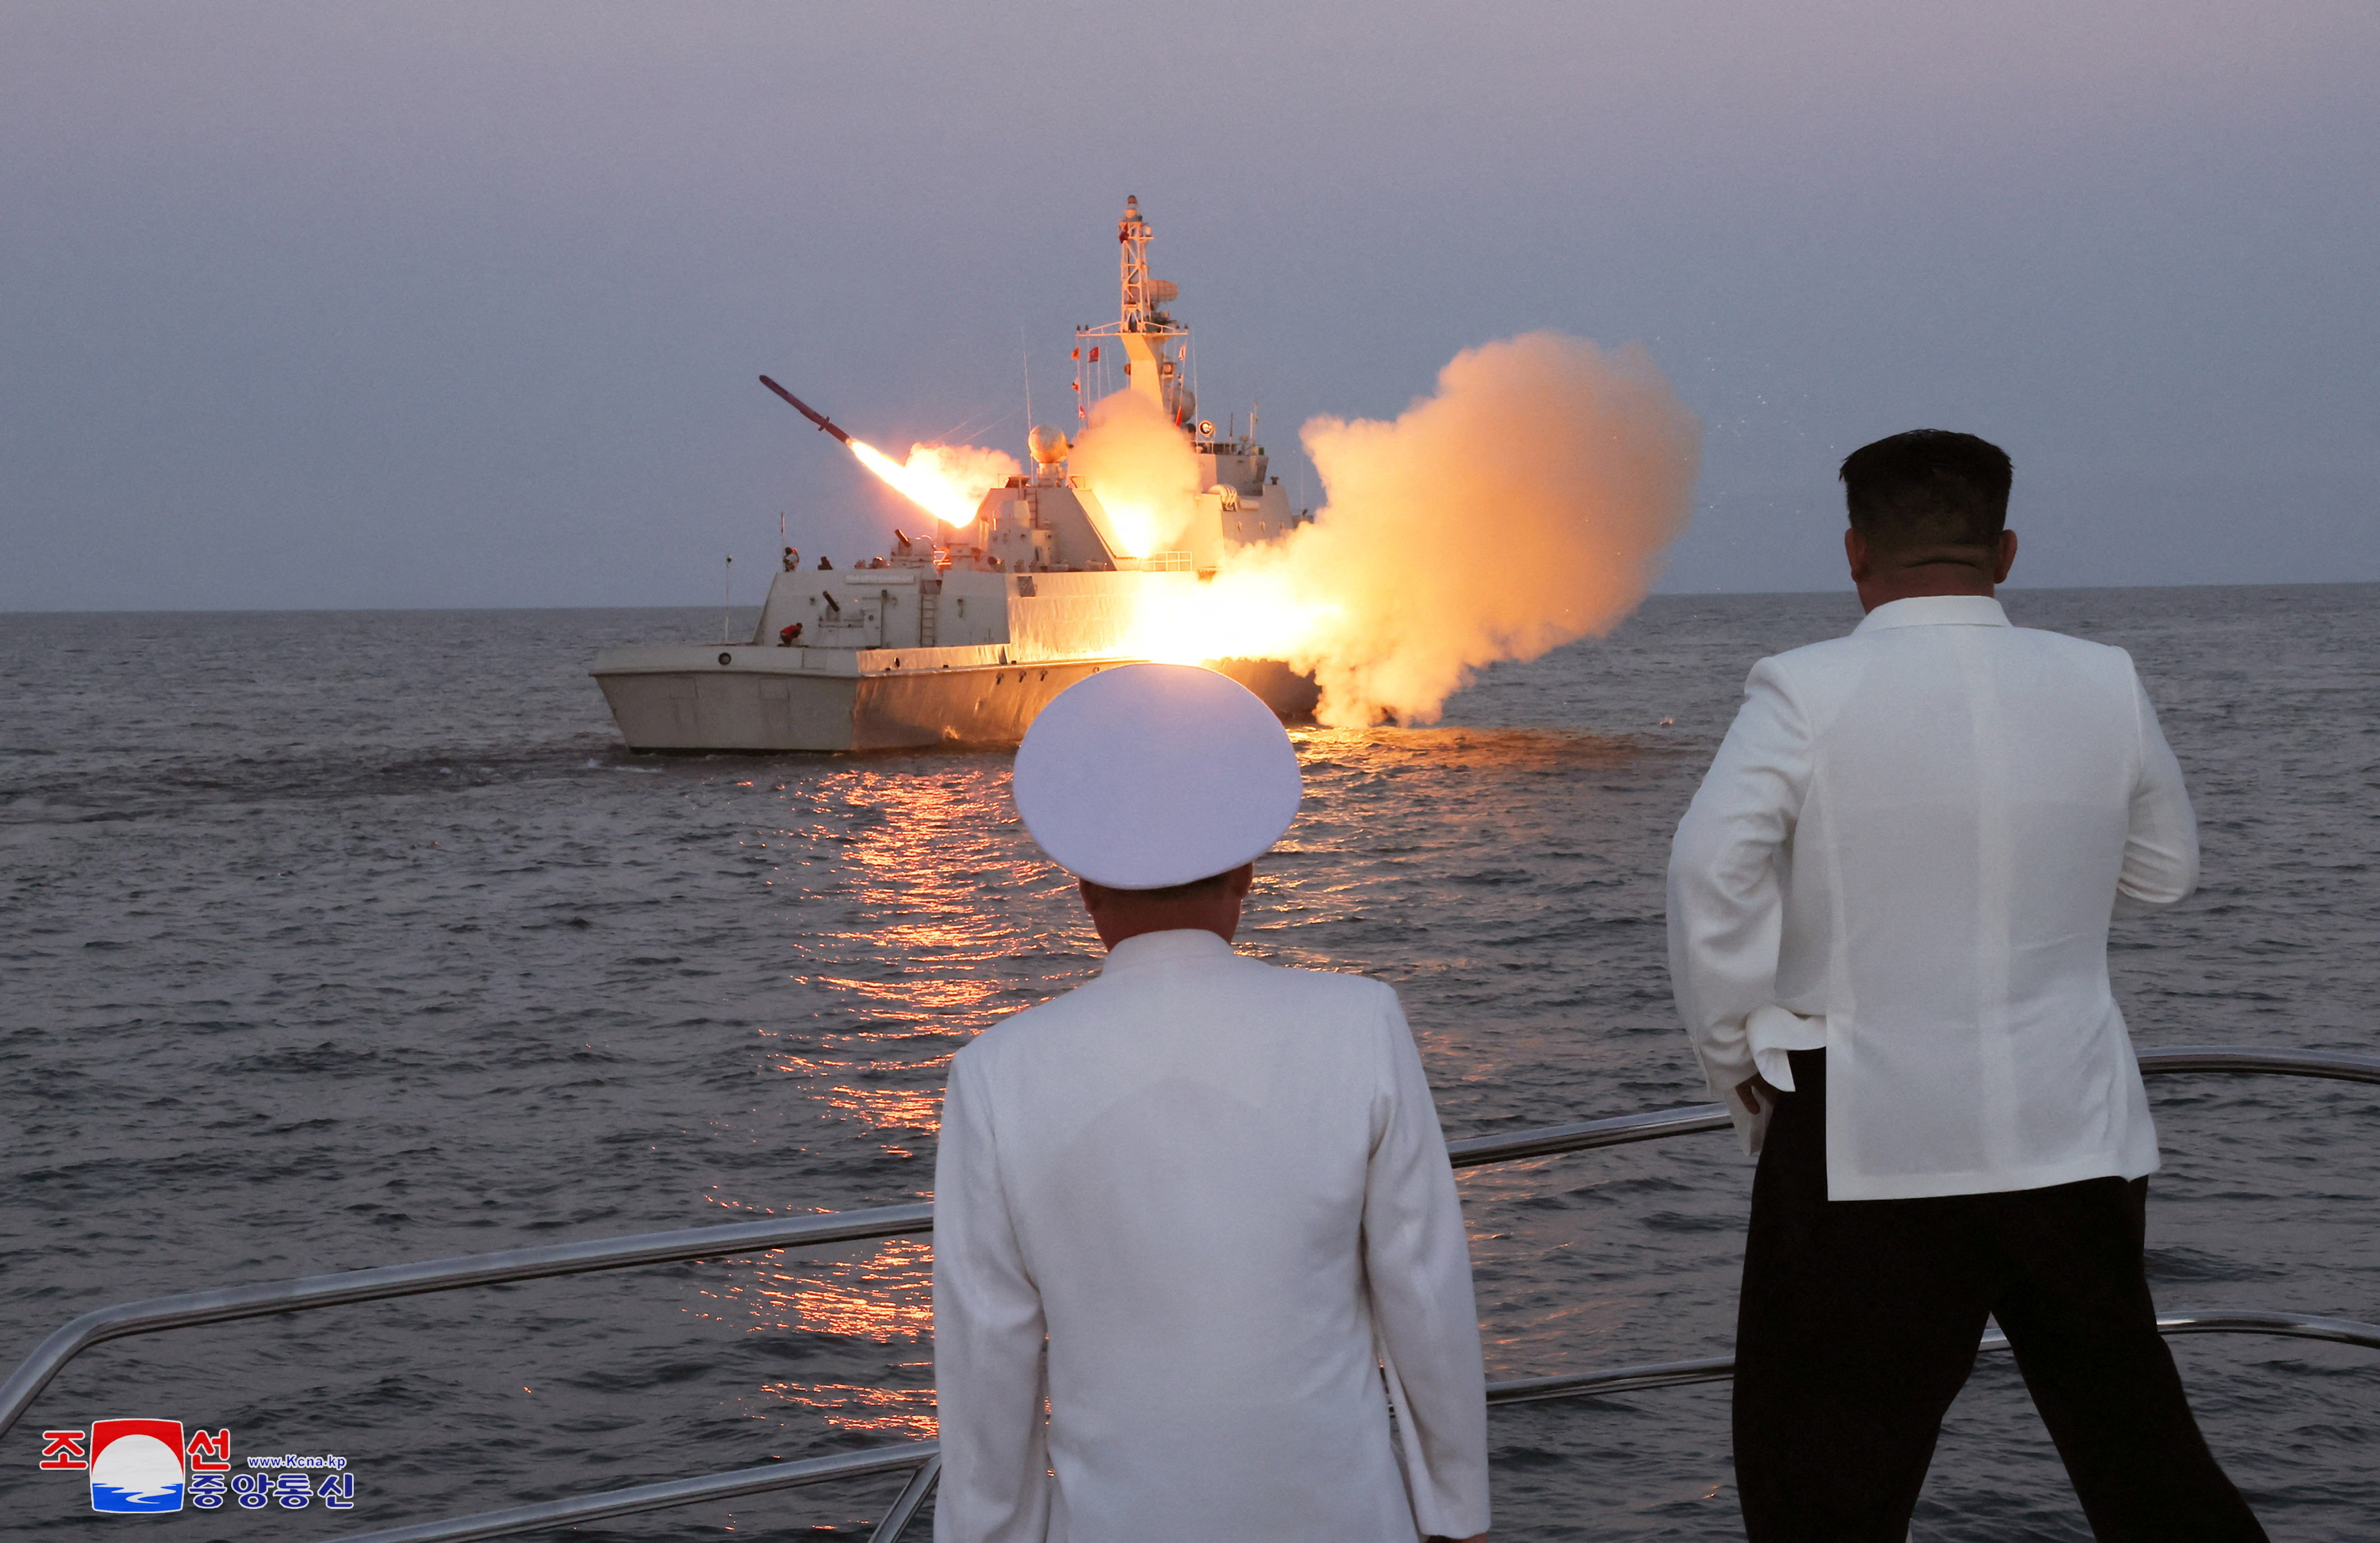 North Korean leader Kim Jong Un oversees a strategic cruise missile test aboard a navy warship